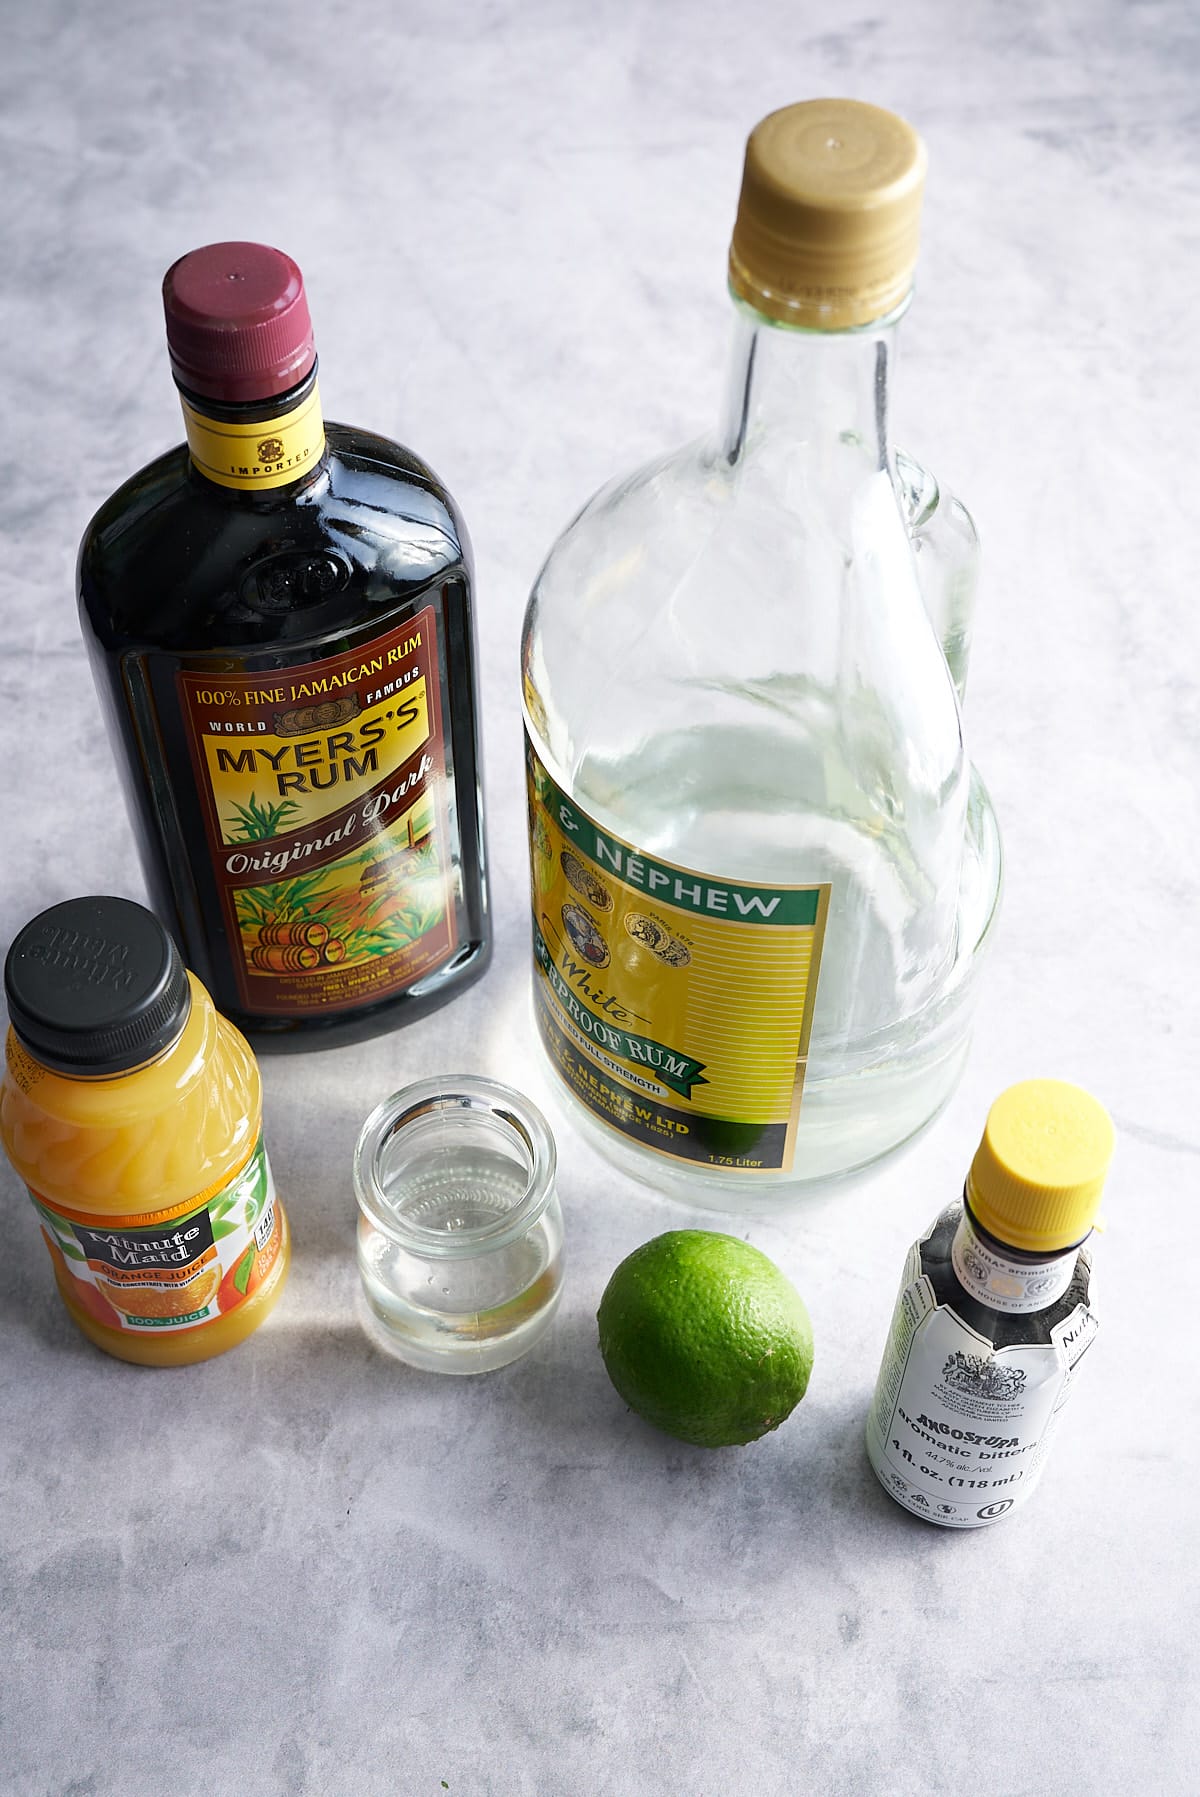 ingredients for planters punch recipe